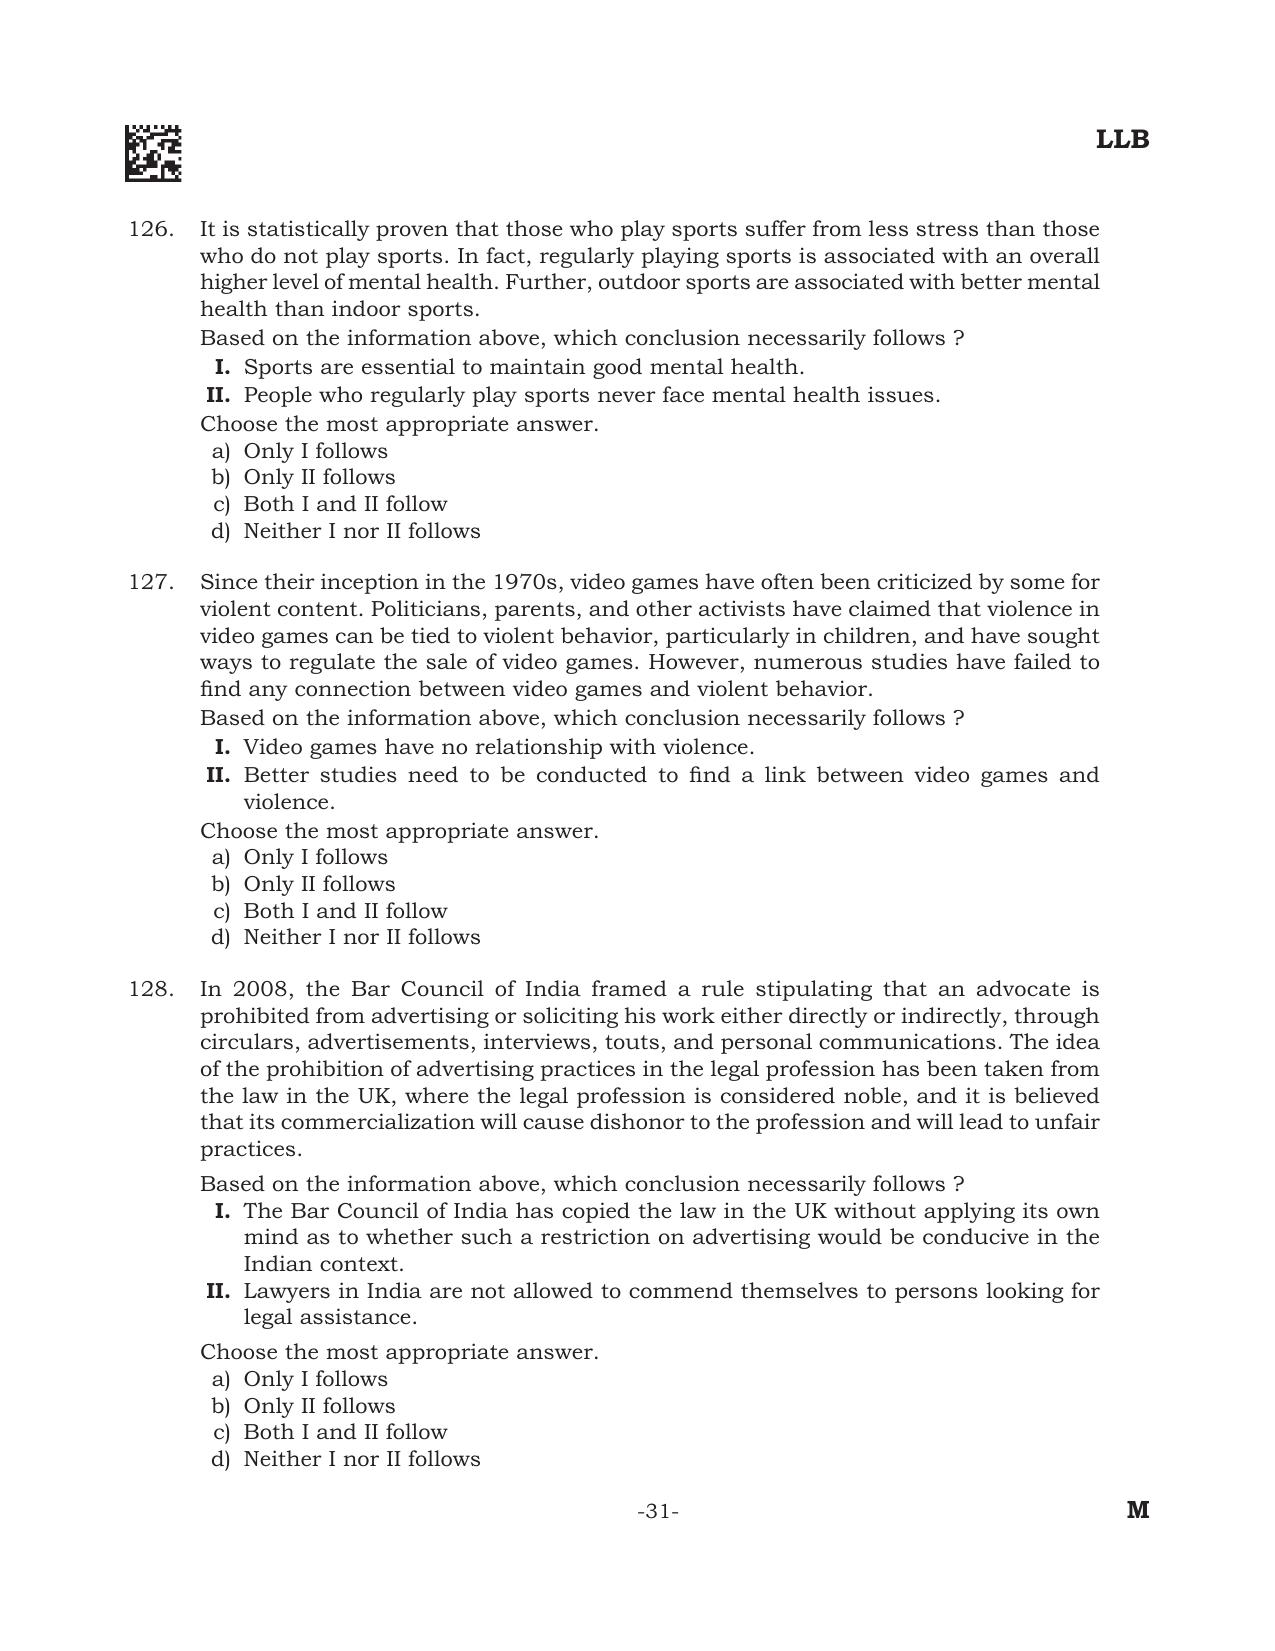 AILET 2022 Question Paper for BA LLB - Page 31